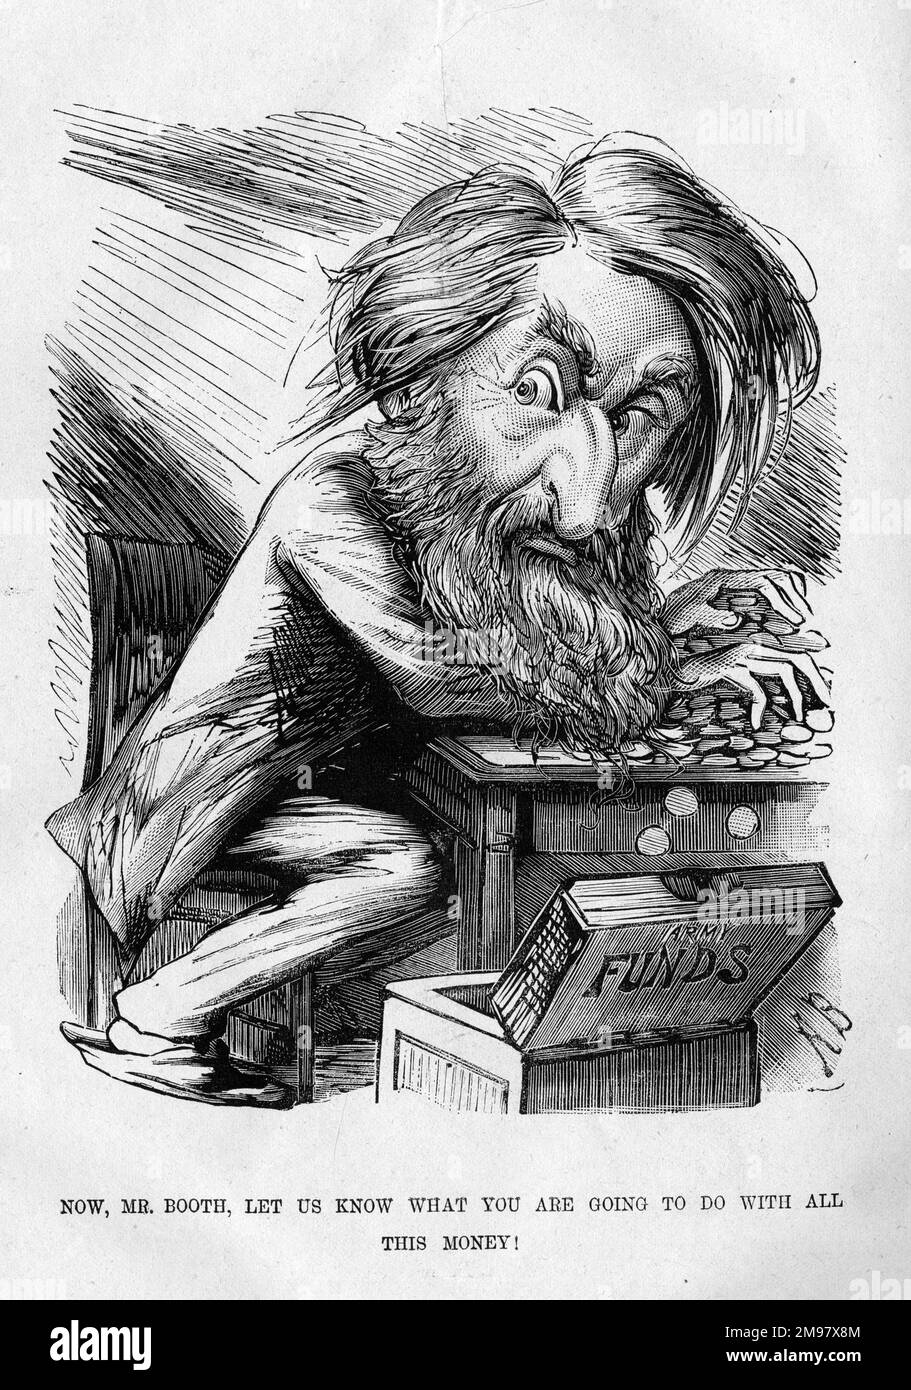 Caricature, General William Booth (1829-1912), founder of the Salvation Army. Let us know what you are going to do with all this money! Stock Photo